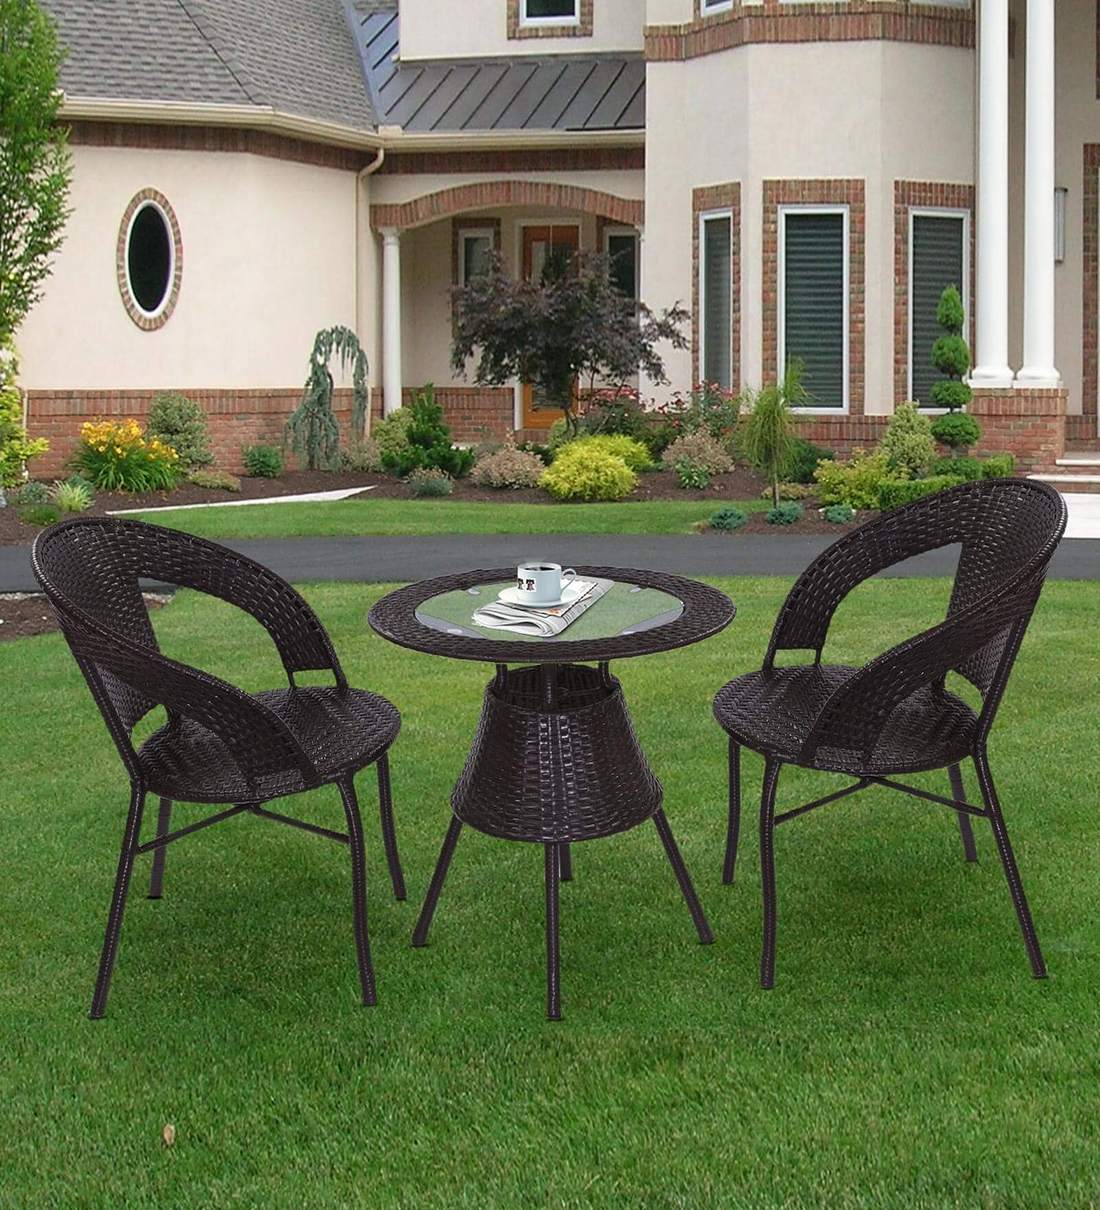 compact-2-seater-outdoor-set-in-mocha-brown-colour-NDM=